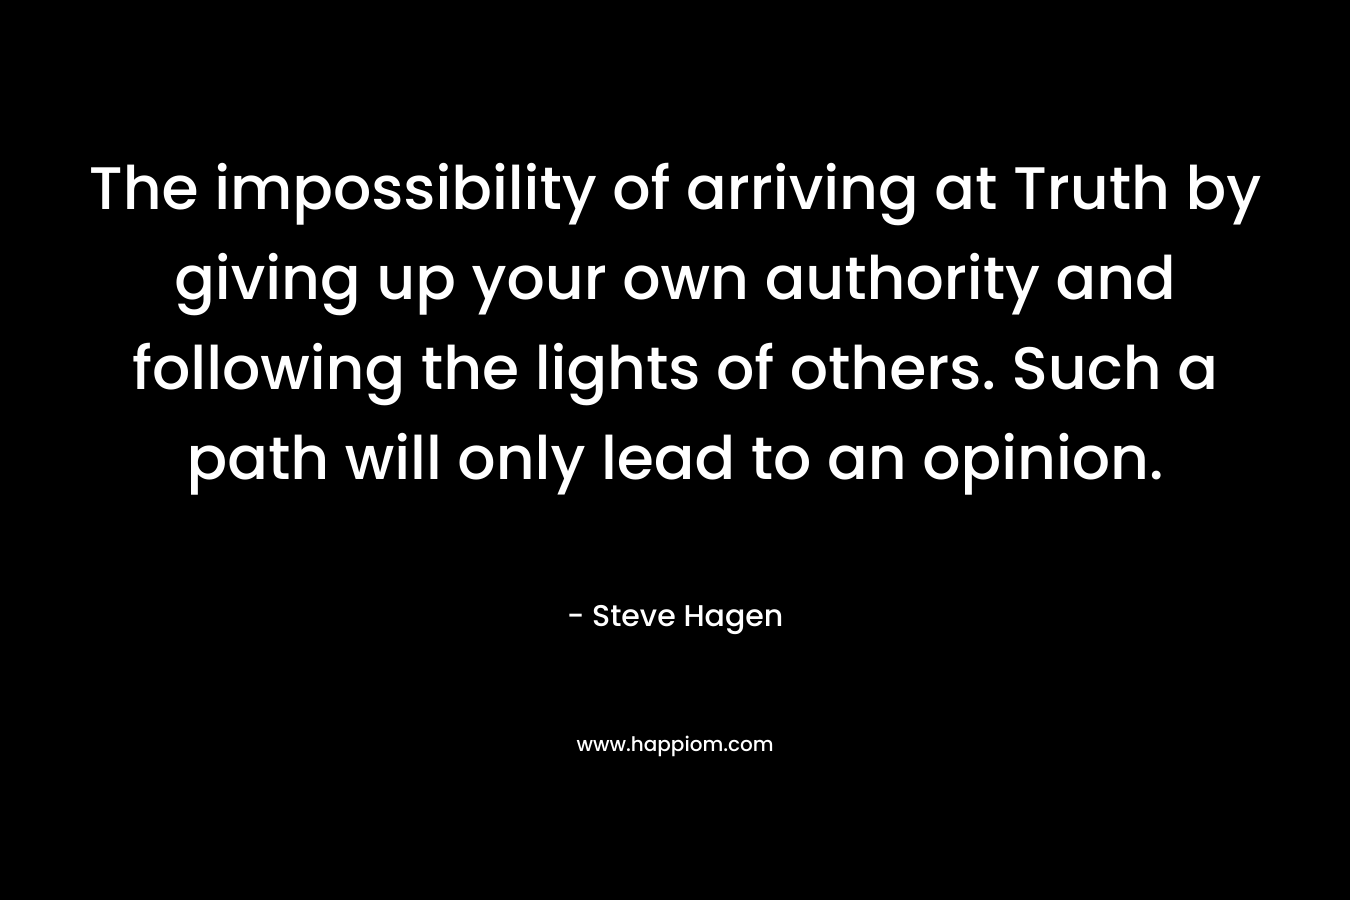 The impossibility of arriving at Truth by giving up your own authority and following the lights of others. Such a path will only lead to an opinion. – Steve Hagen